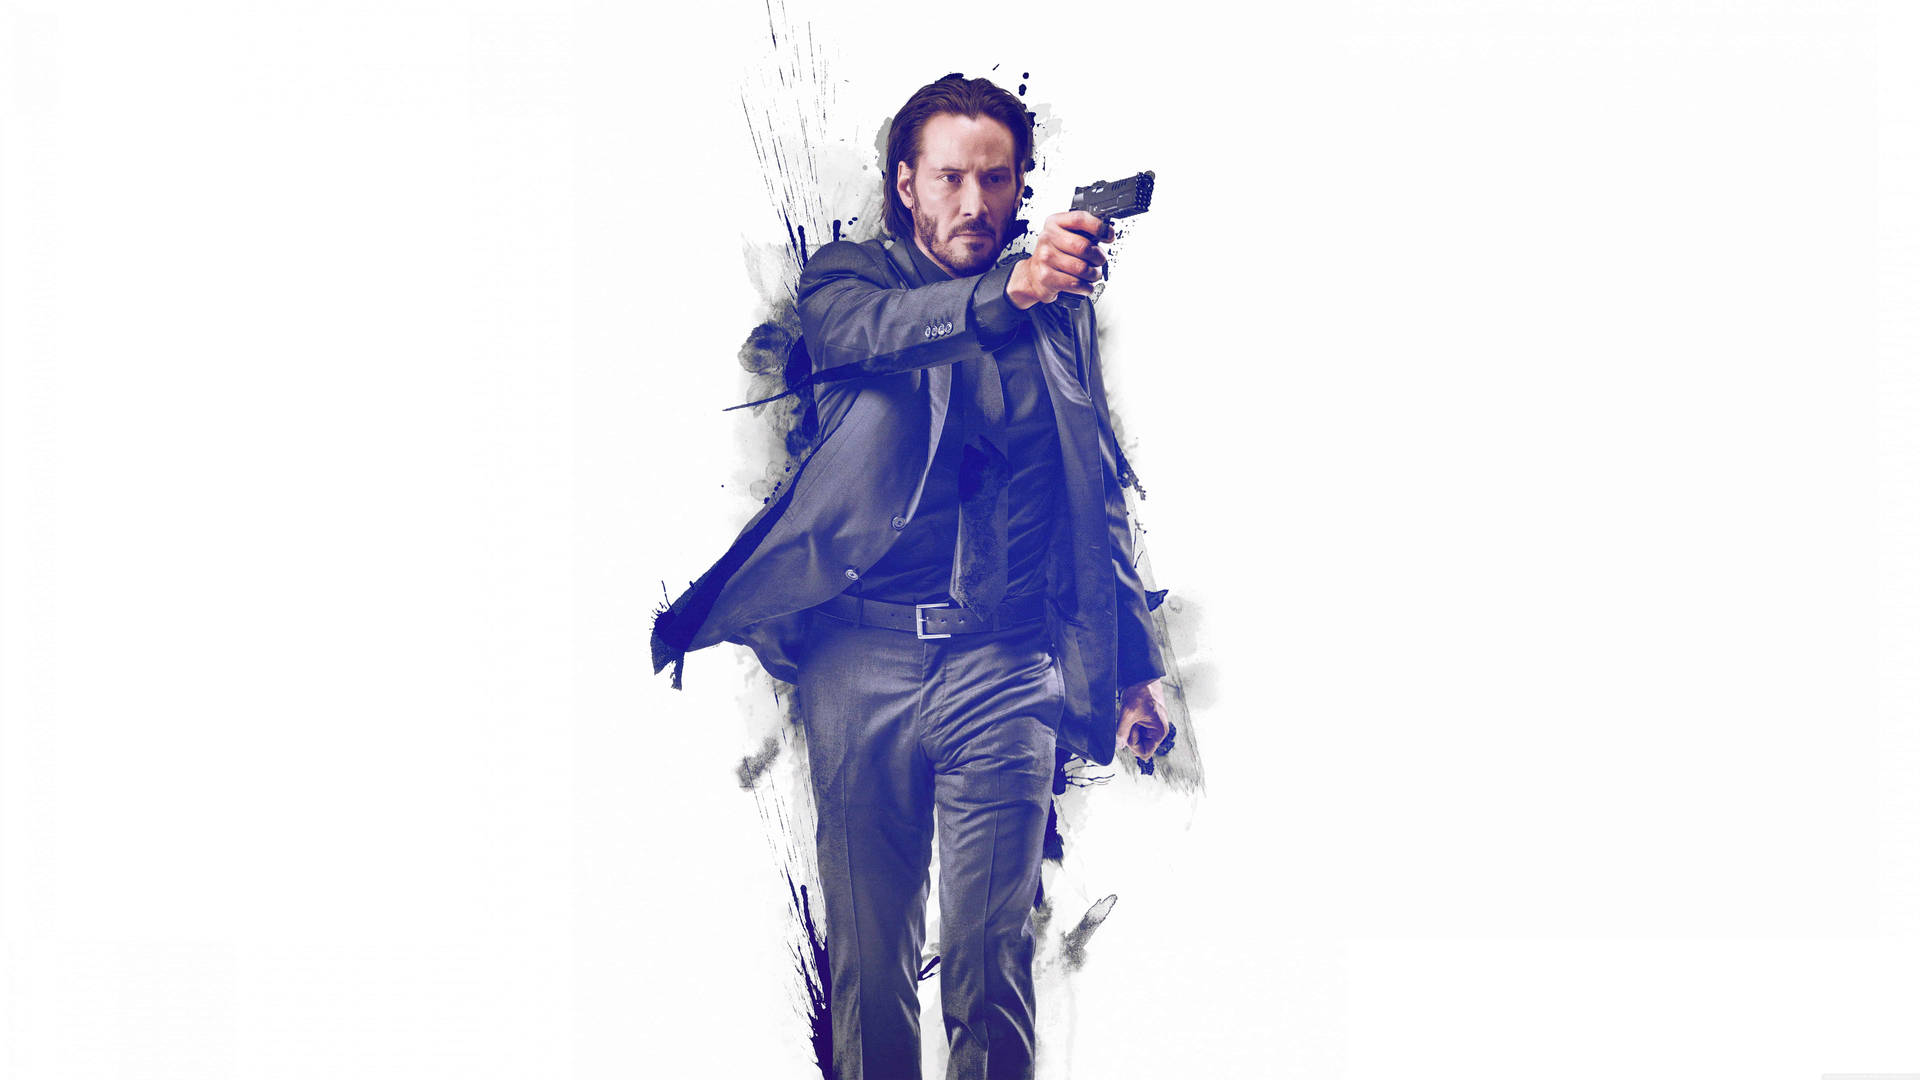 John Wick- Taking out the bad guys since 2014 Wallpaper